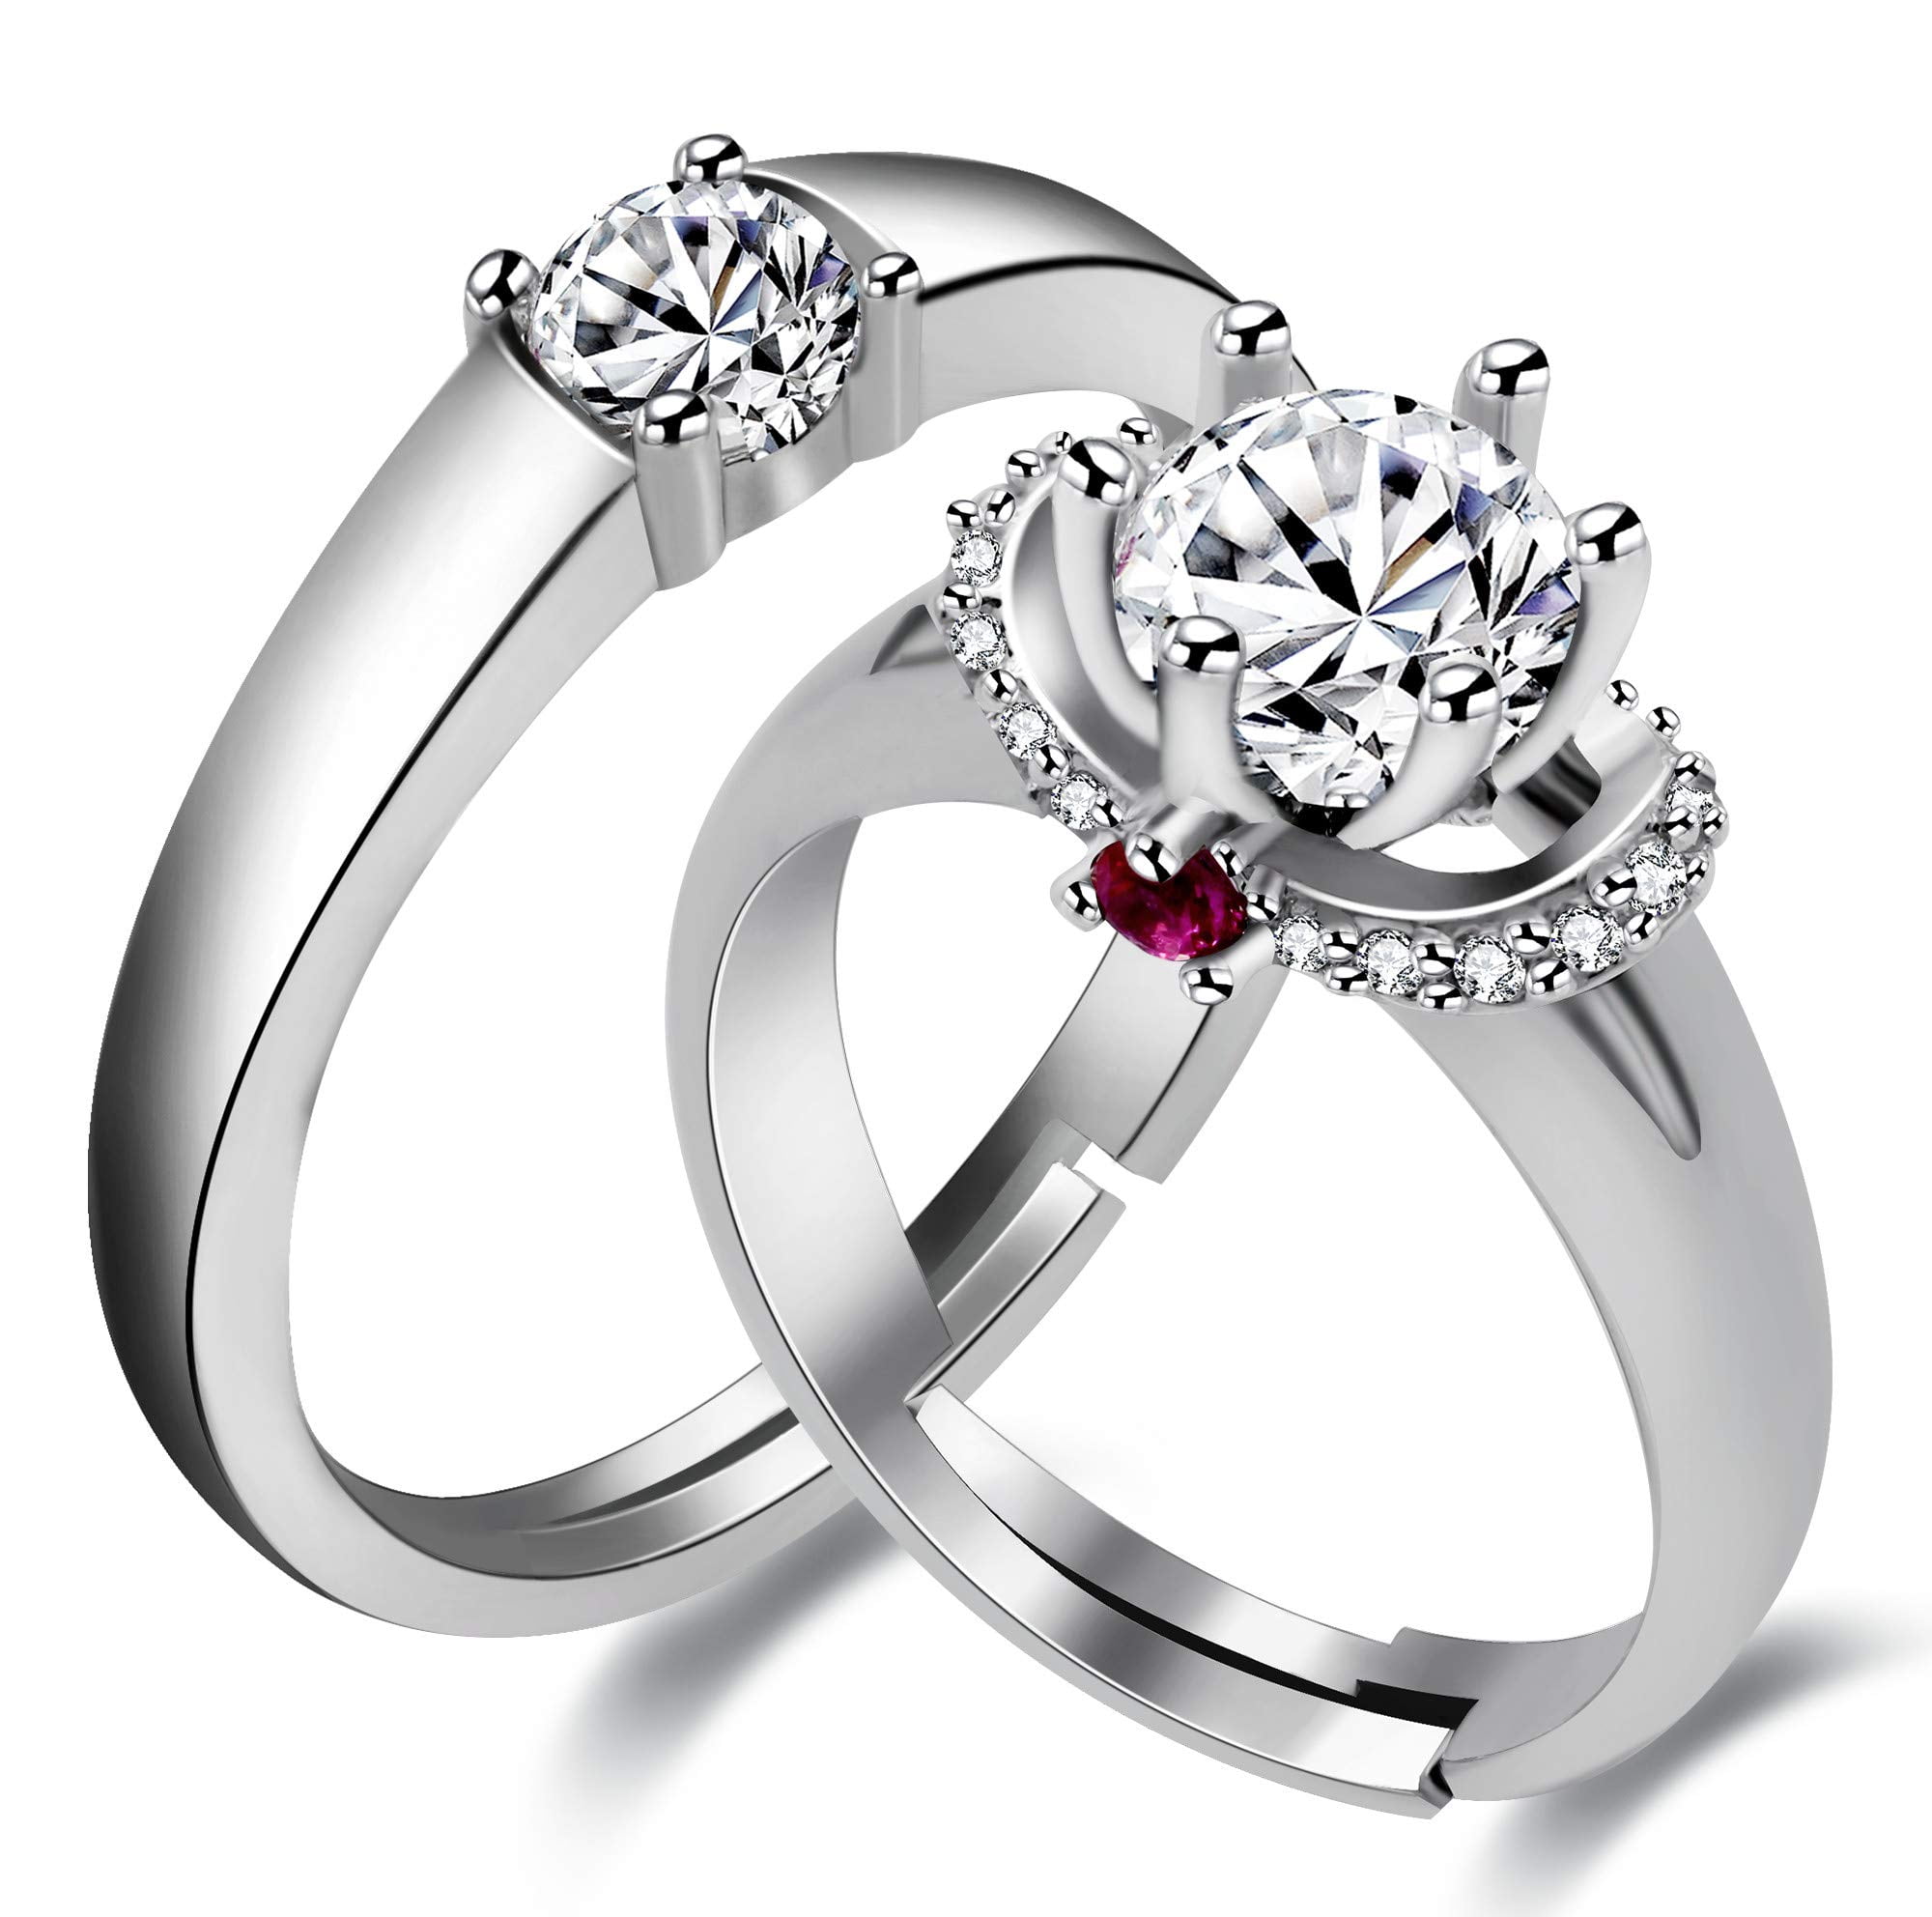 10 Tips to Buying Diamond Engagement Rings on a Budget